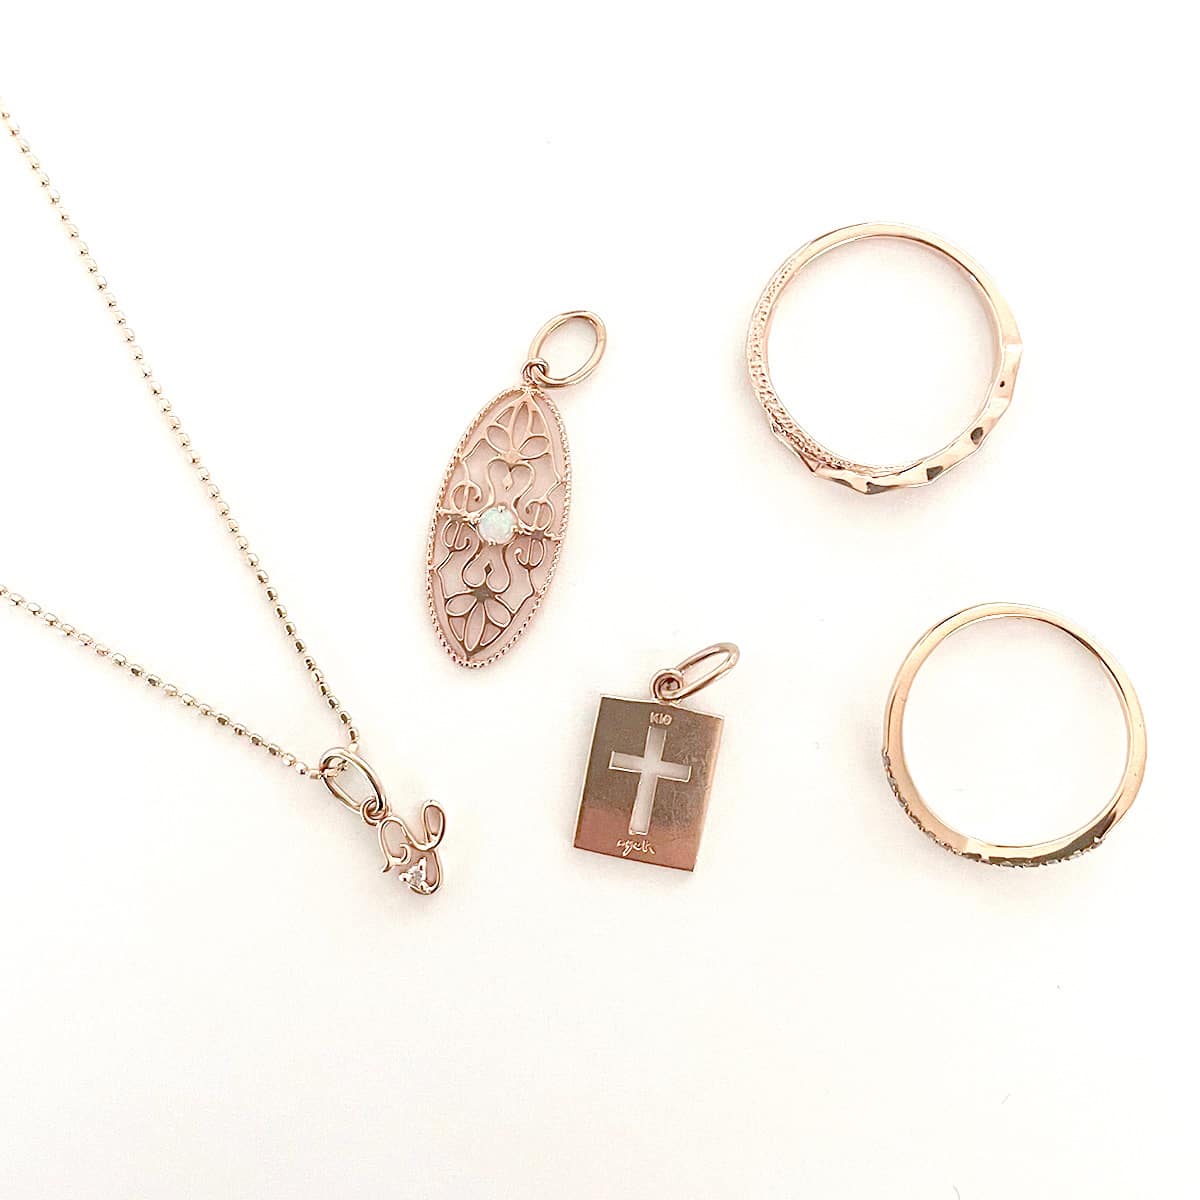 [Set Product] Agat ring necklace charm set of 5